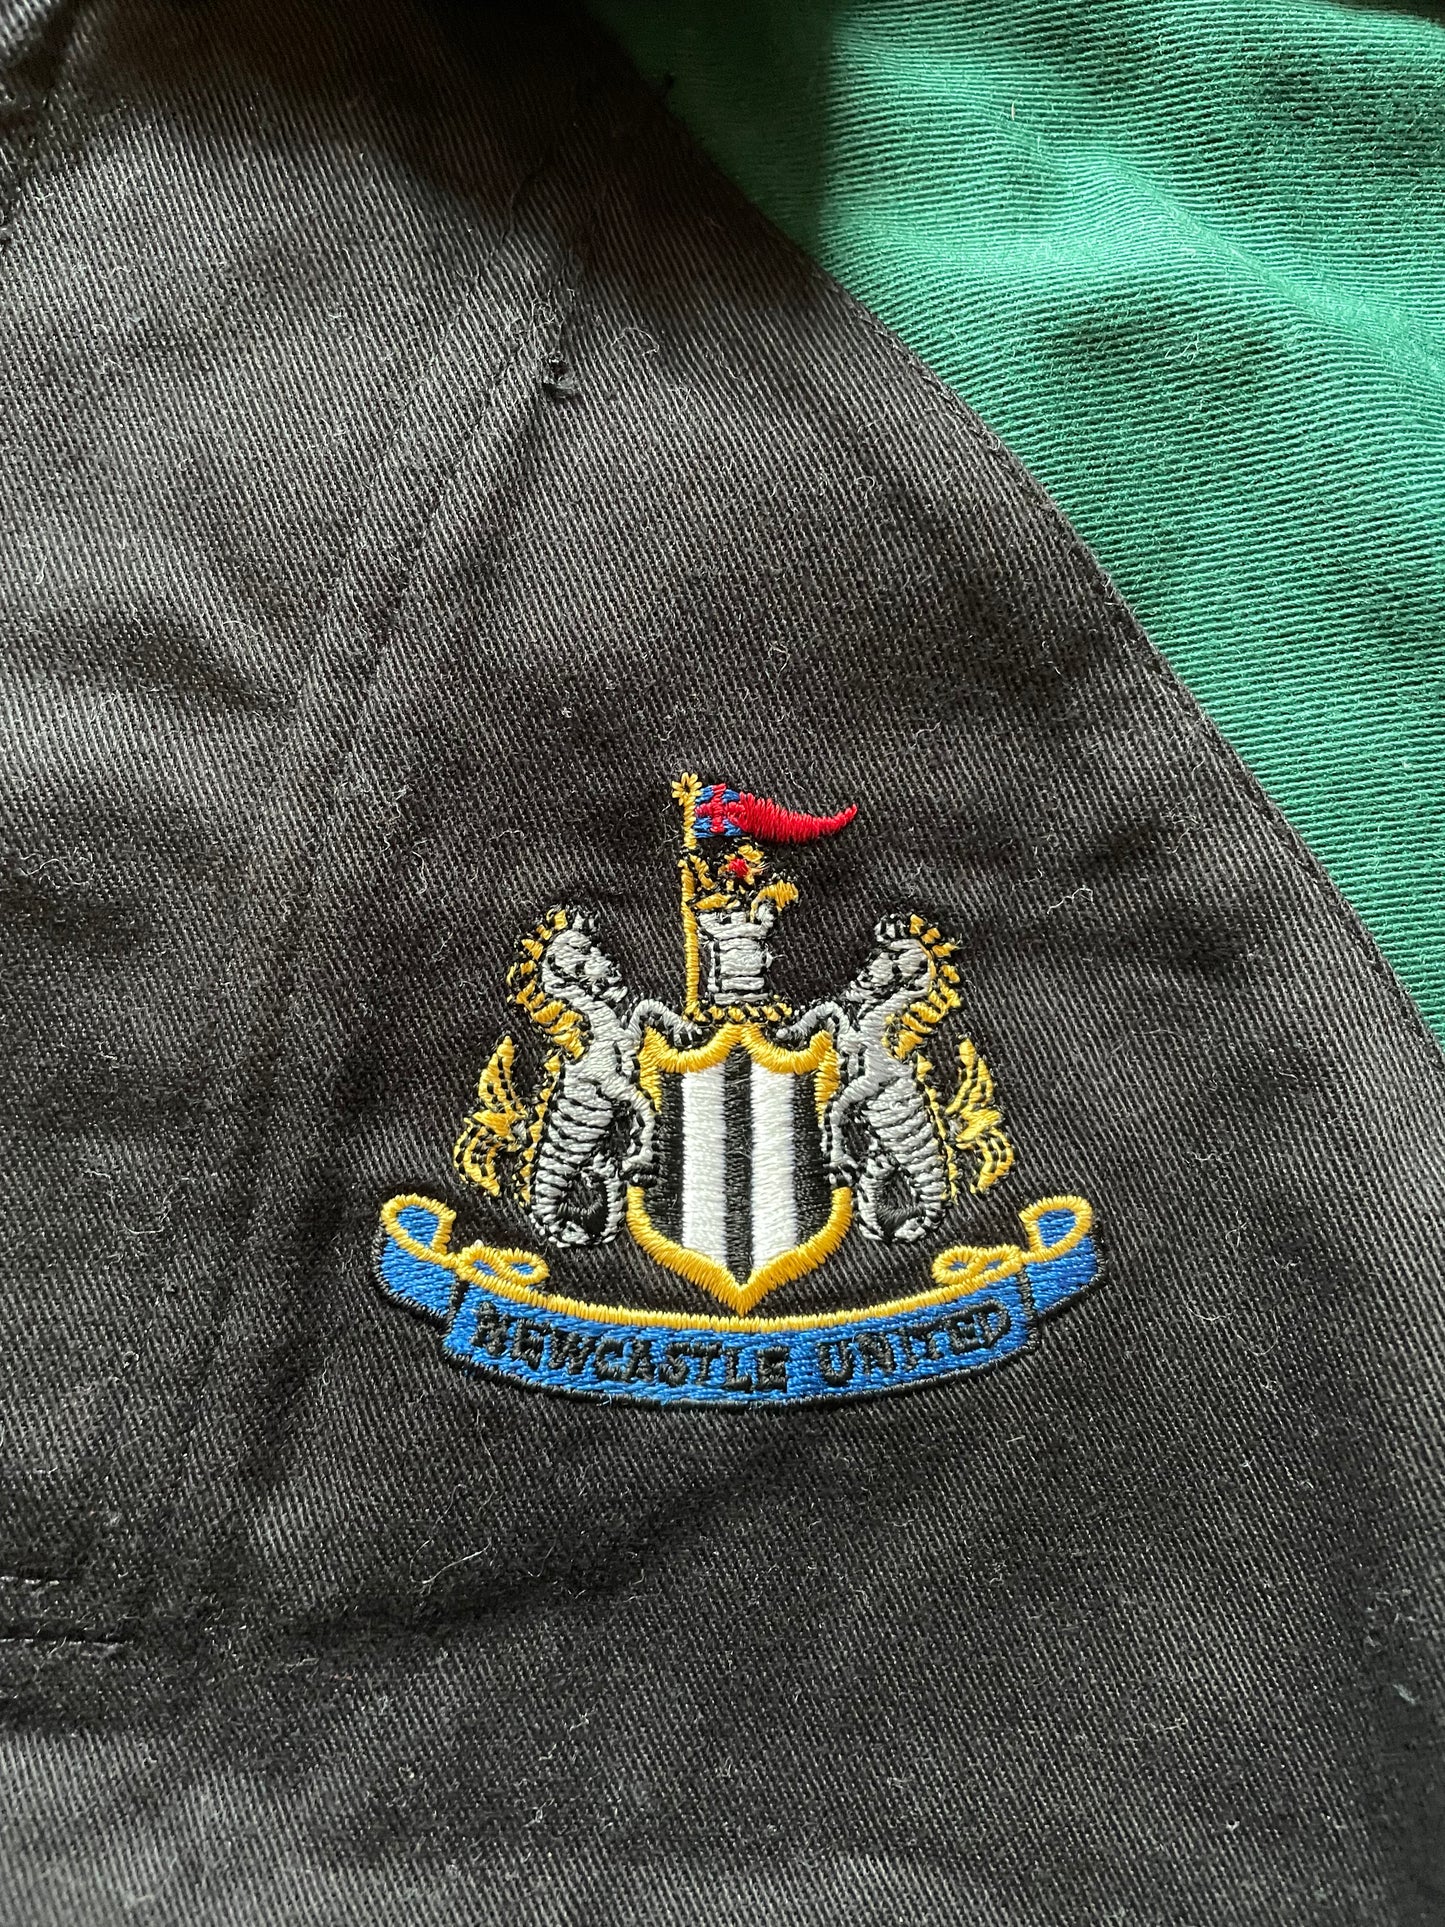 Newcastle Drill Training Top 1995 (excellent) Adults XS / Youths see below